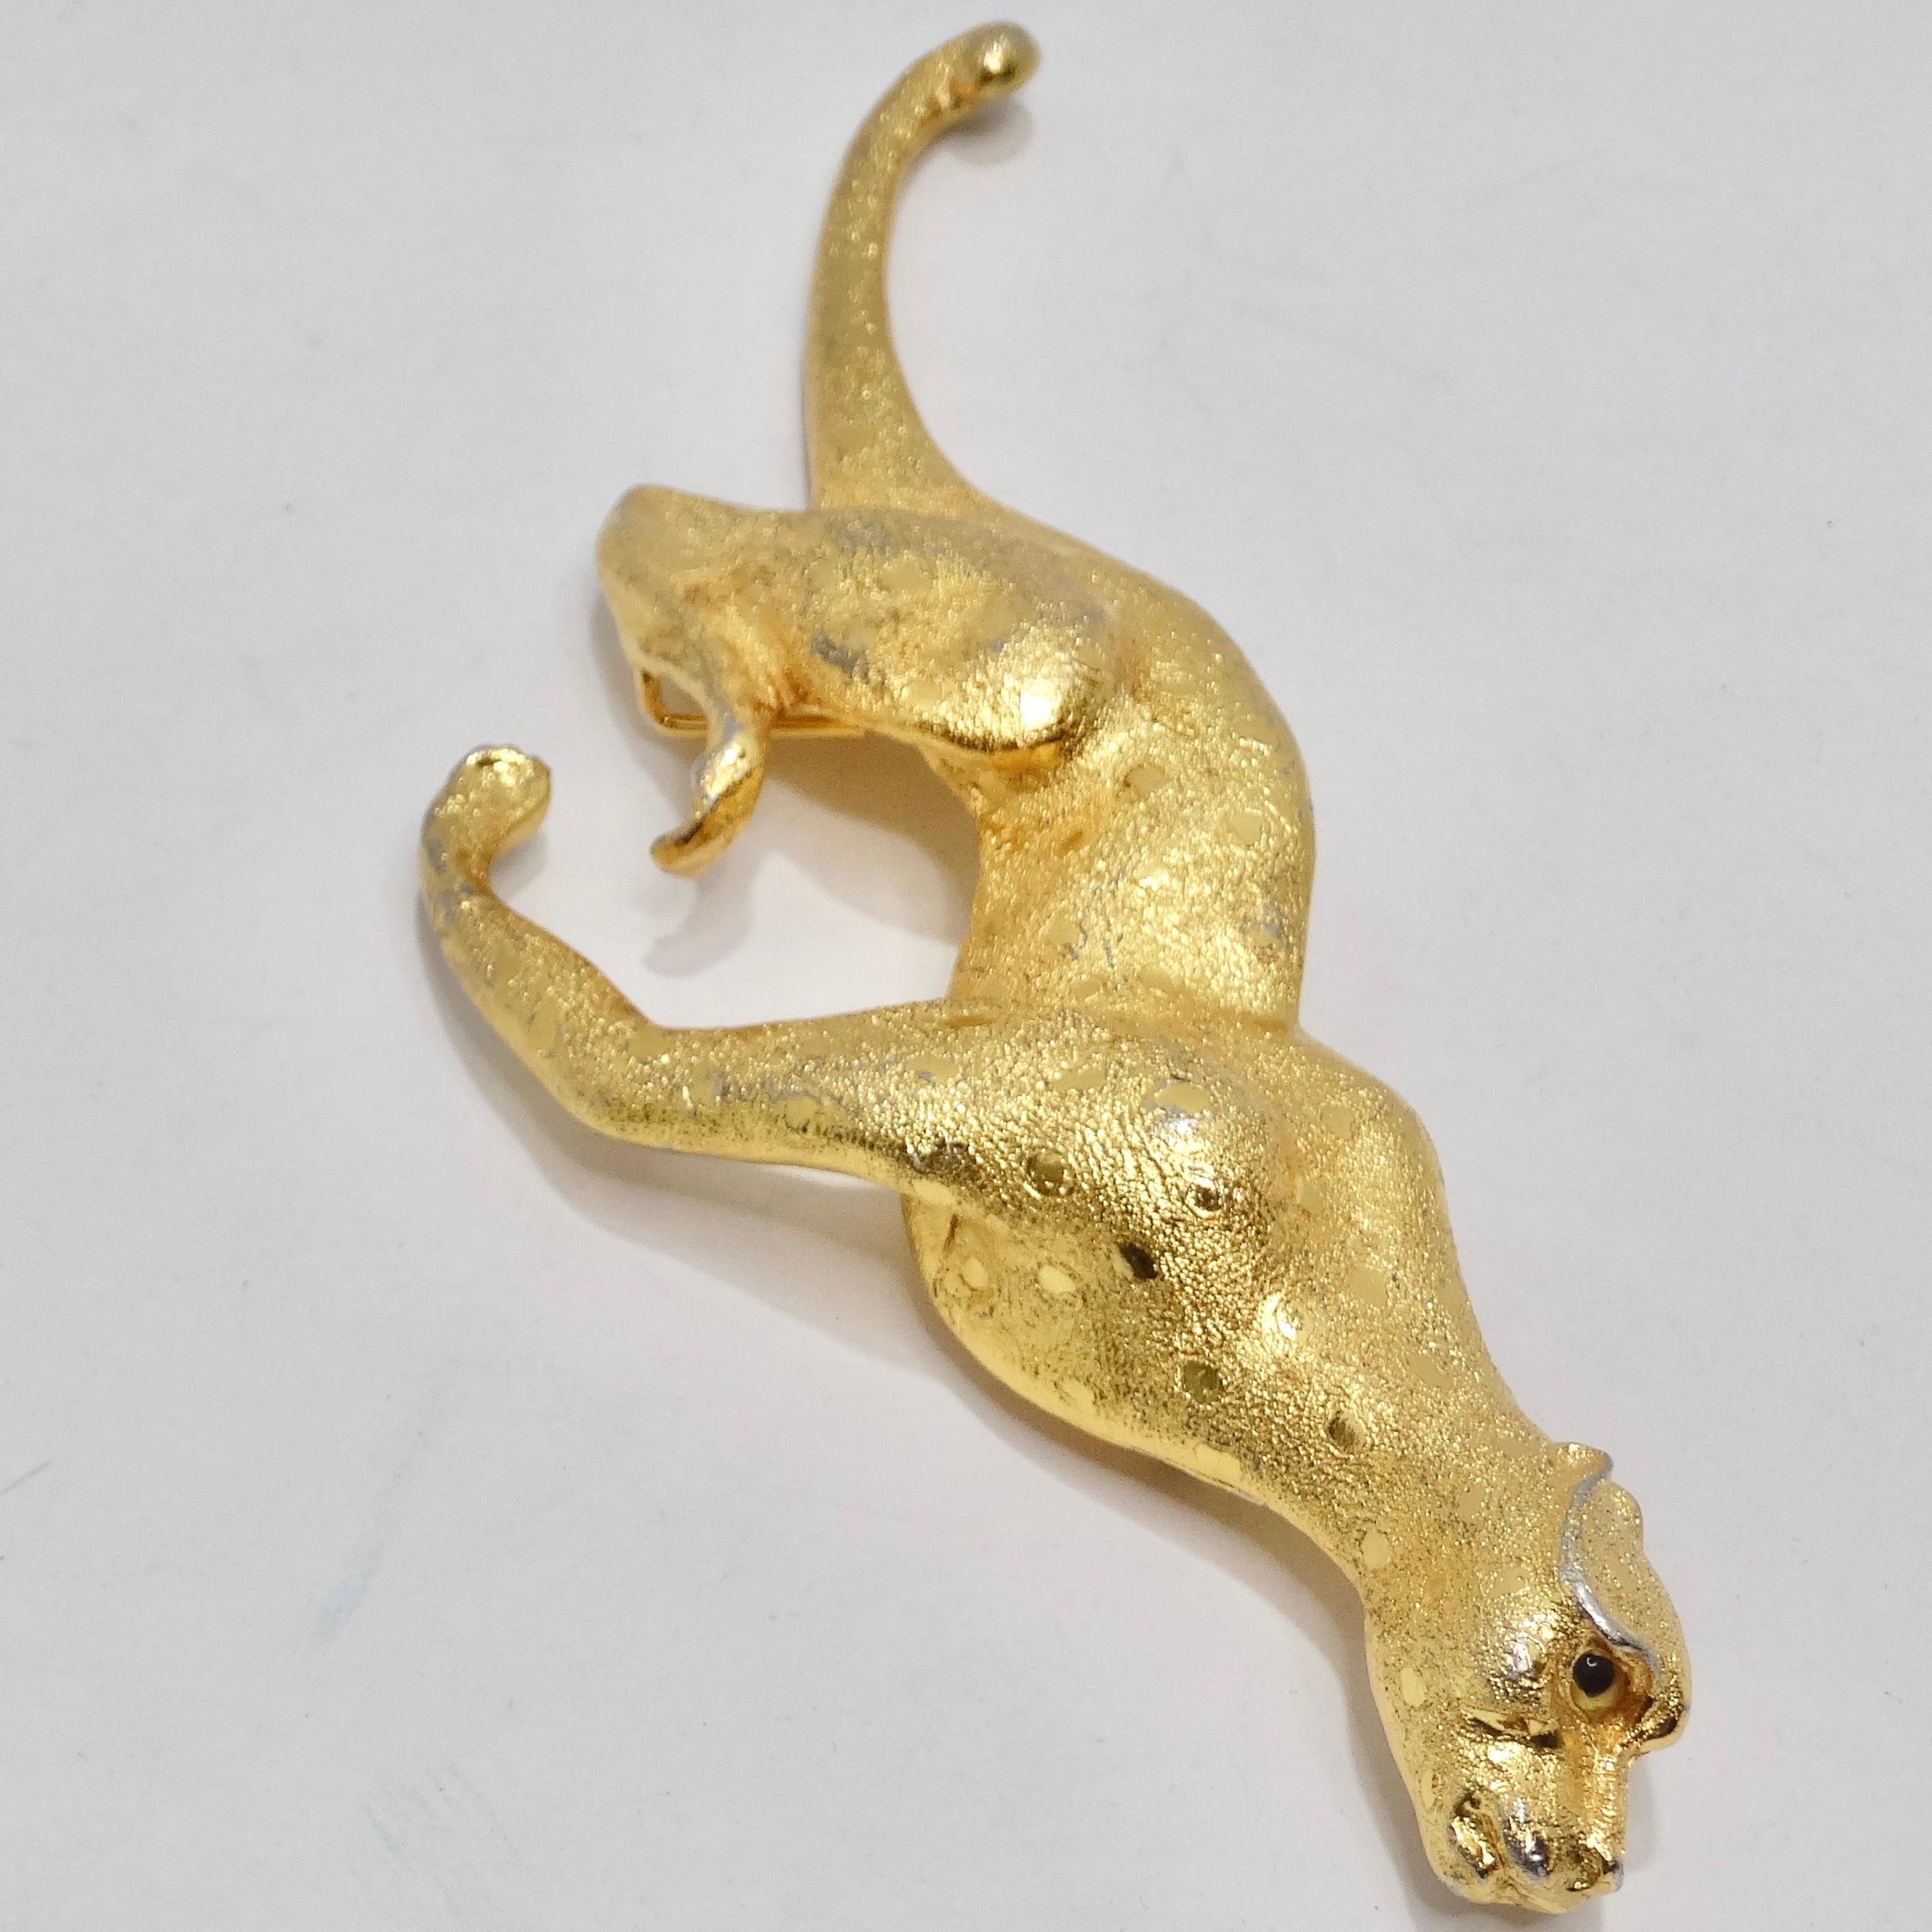 Christopher Ross 1992 Gold Plated Jumbo Cheetah Belt Buckle In Excellent Condition For Sale In Scottsdale, AZ